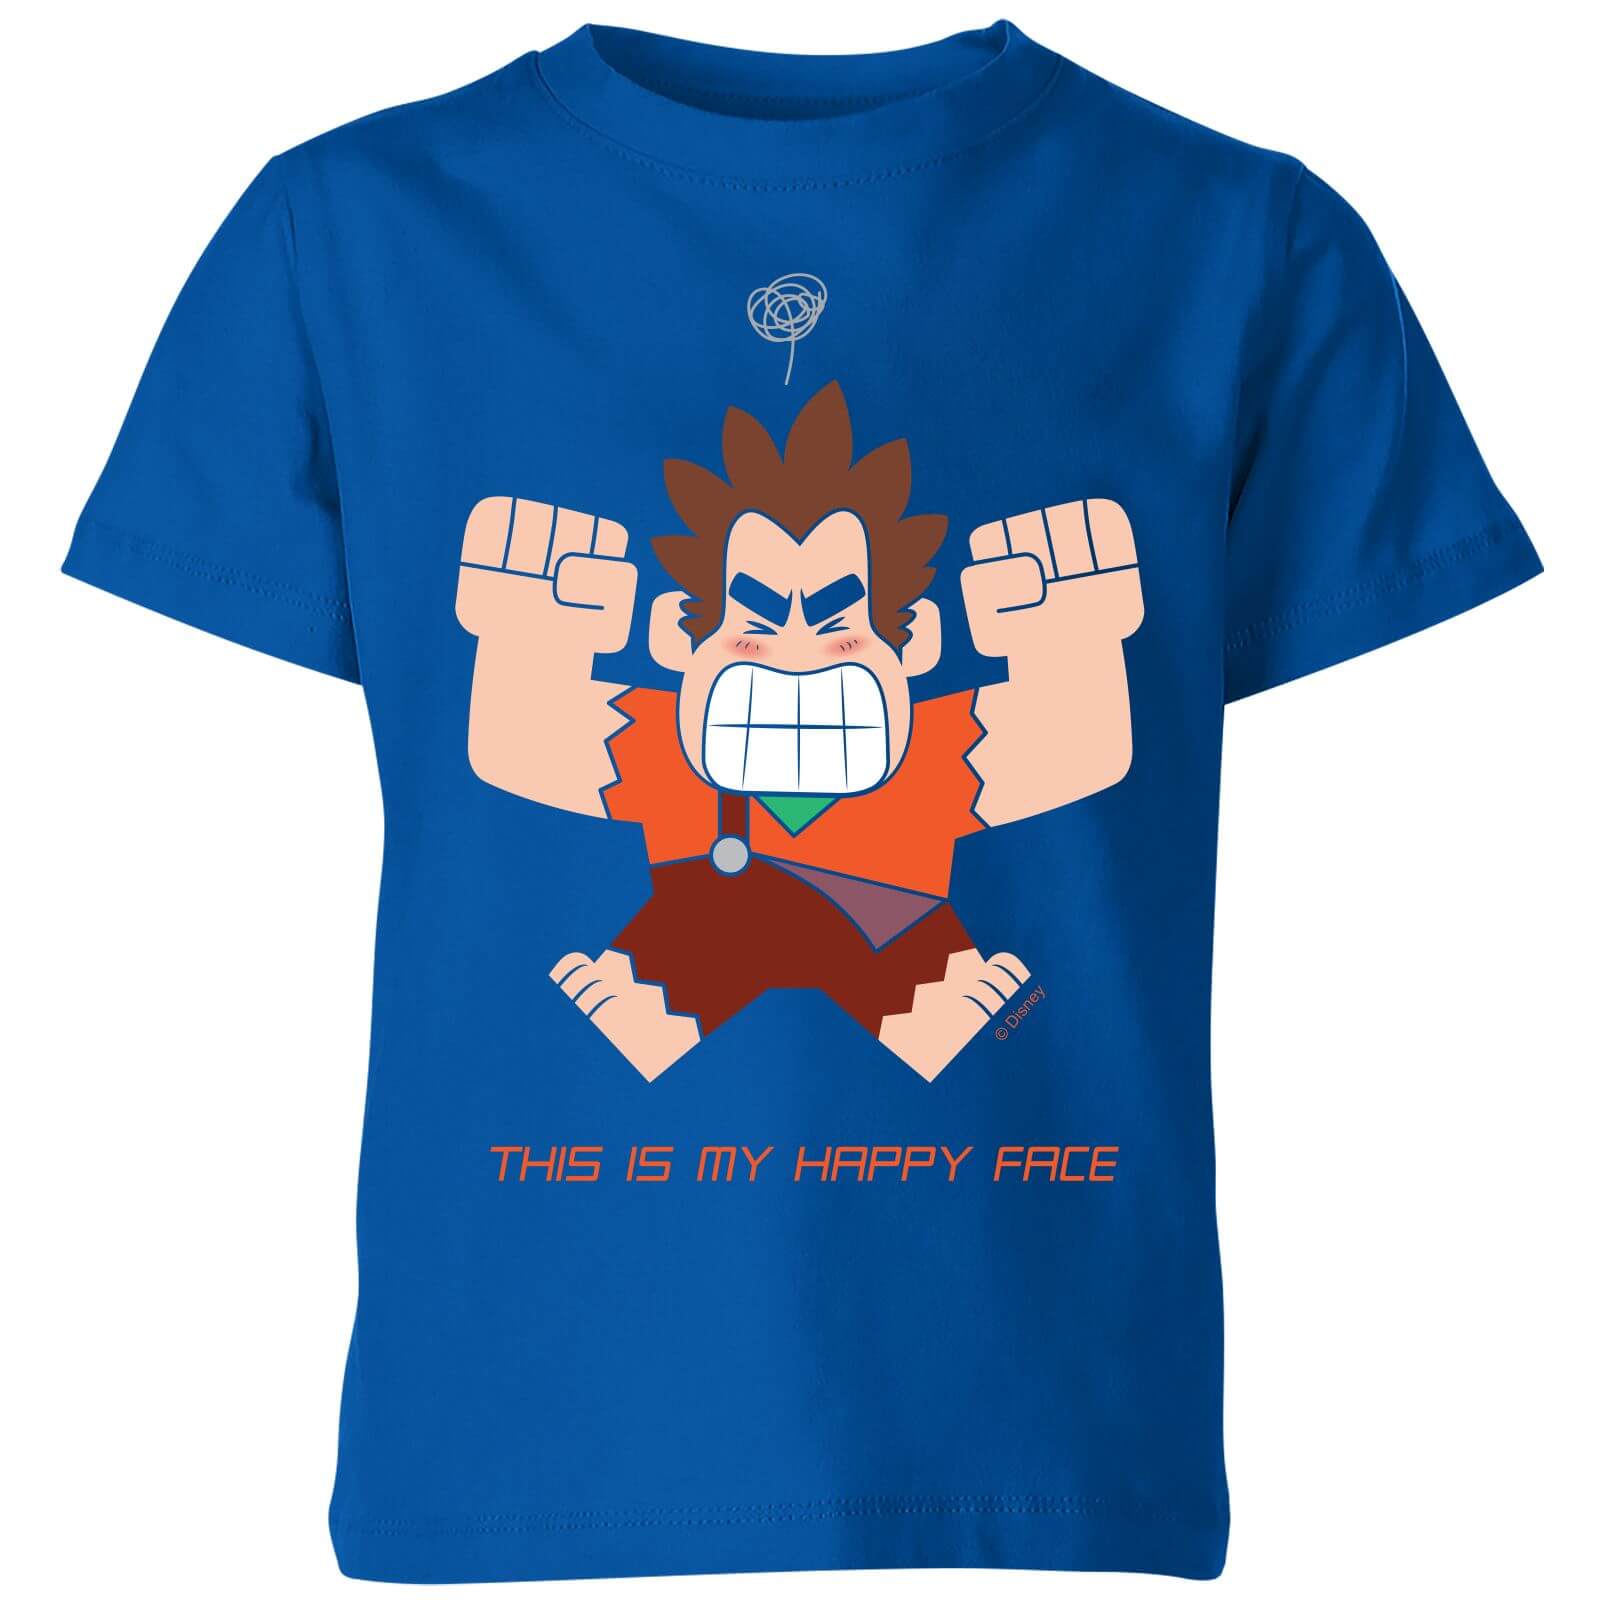 Wreck-it Ralph This Is My Happy Face Kids' T-Shirt - Royal Blue - 5-6 Years